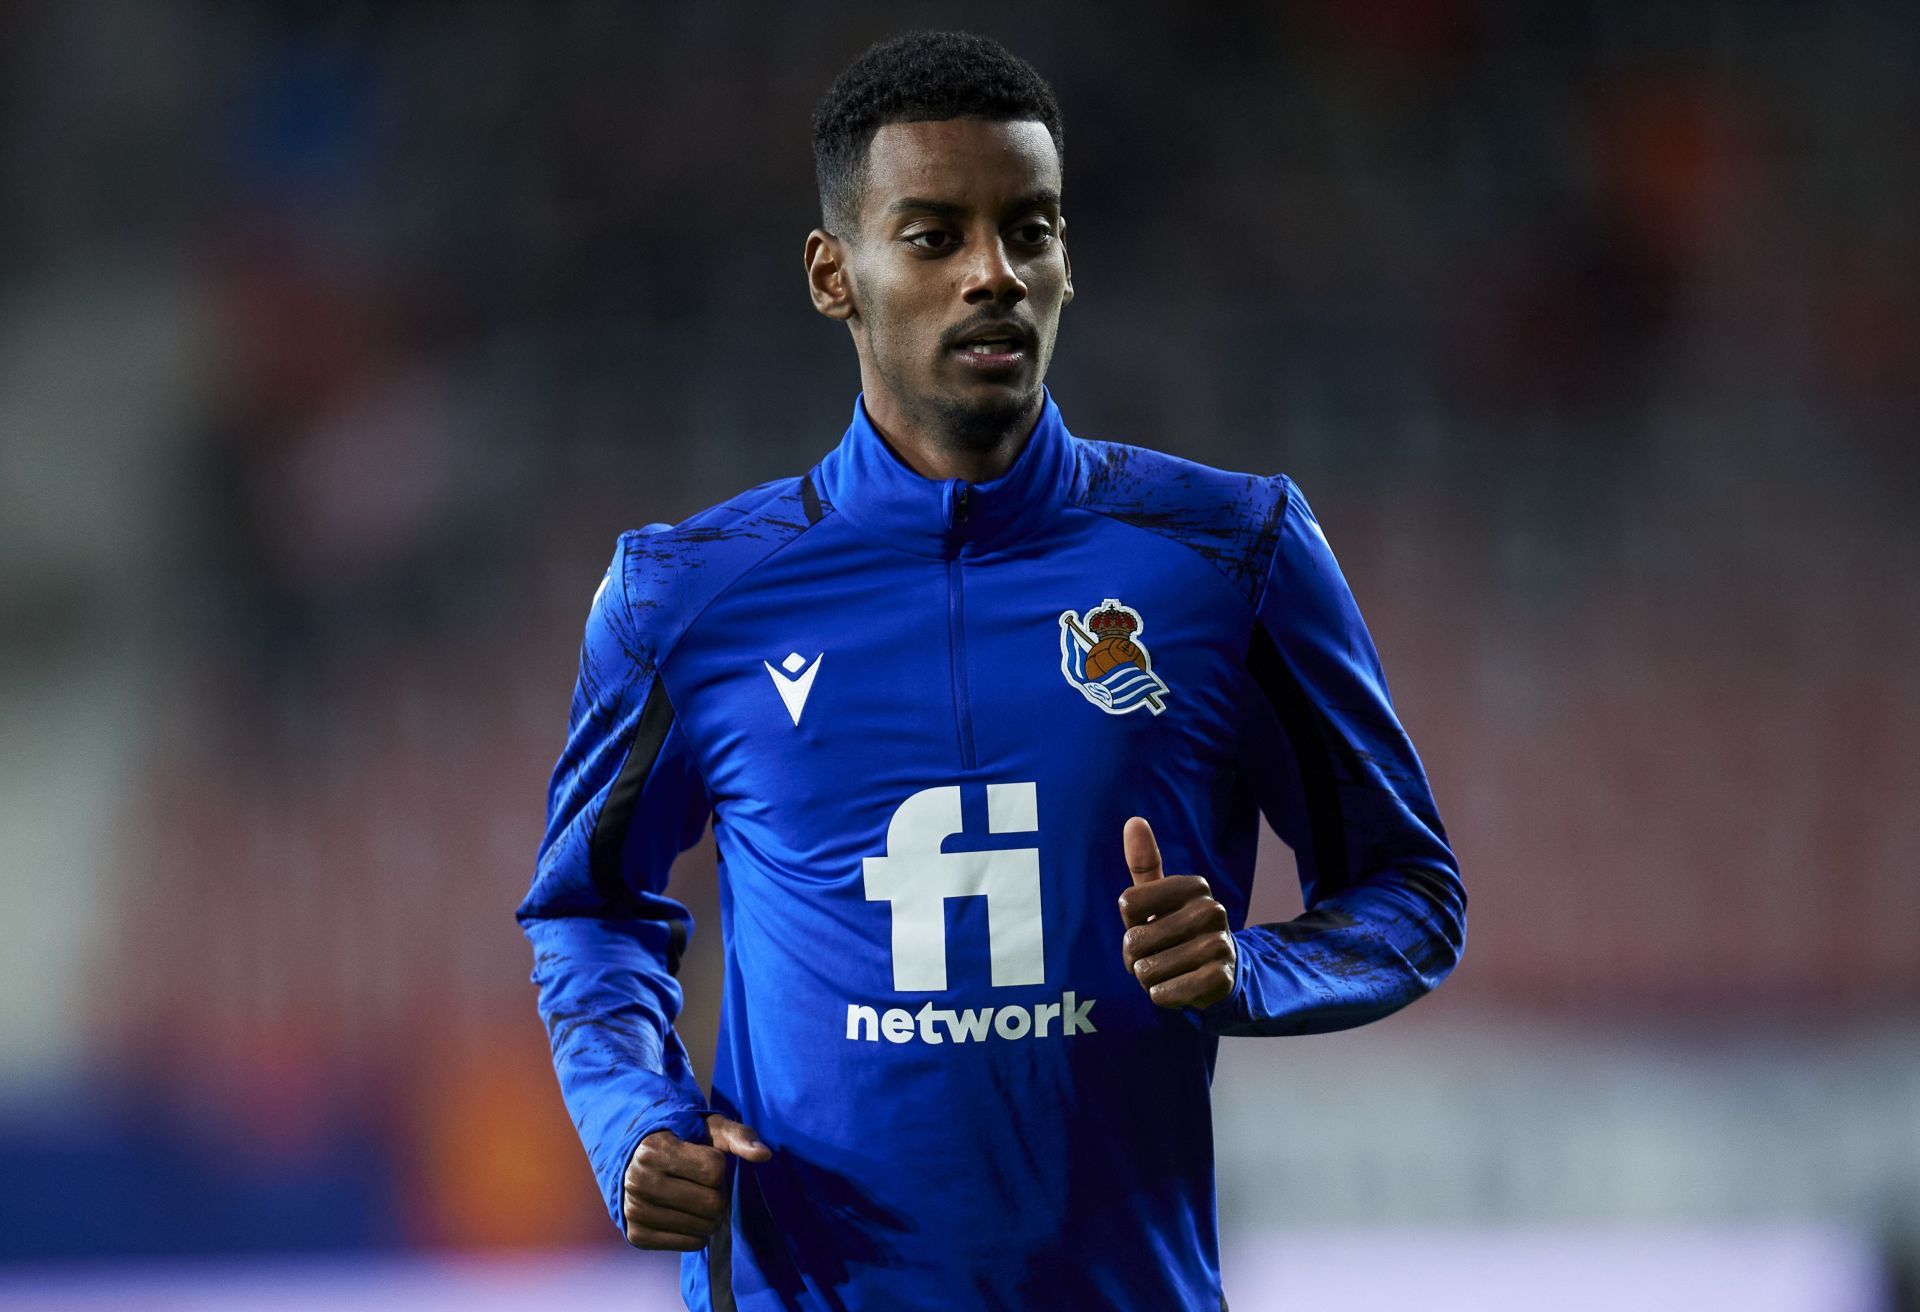 Arsenal have been dealt a blow in their pursuit of Alexander Isak.